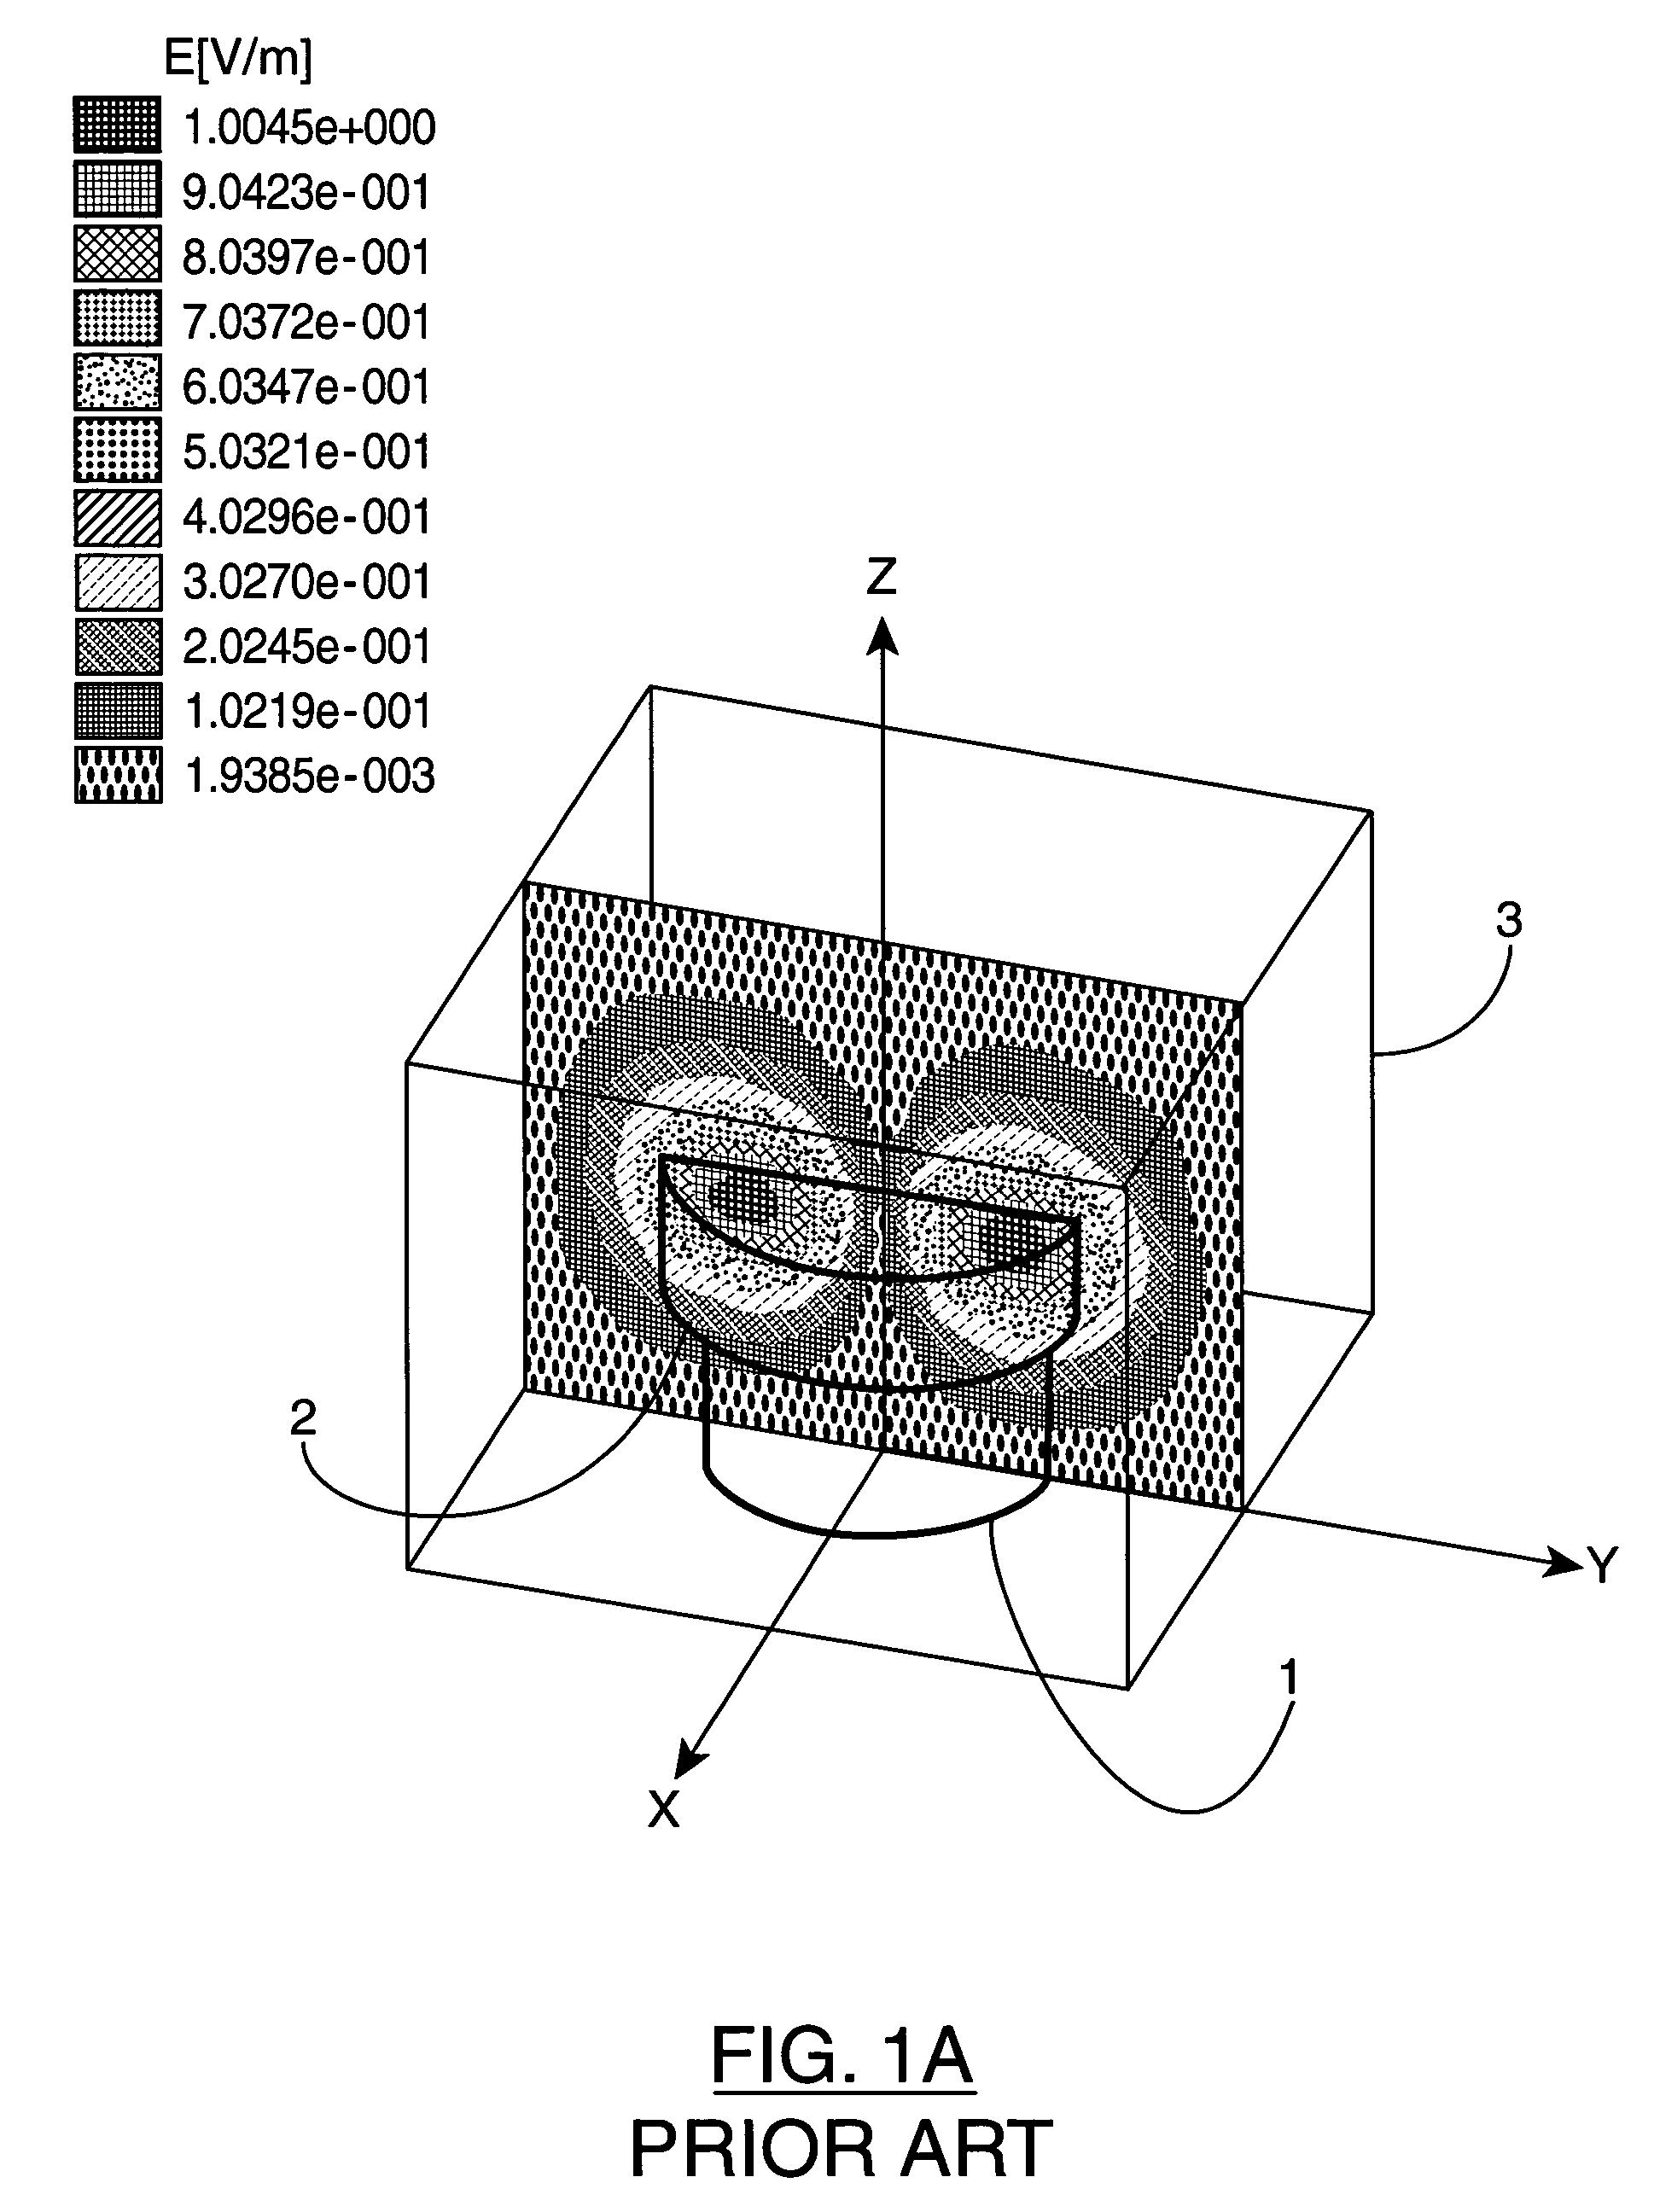 Microwave resonator and filter assembly